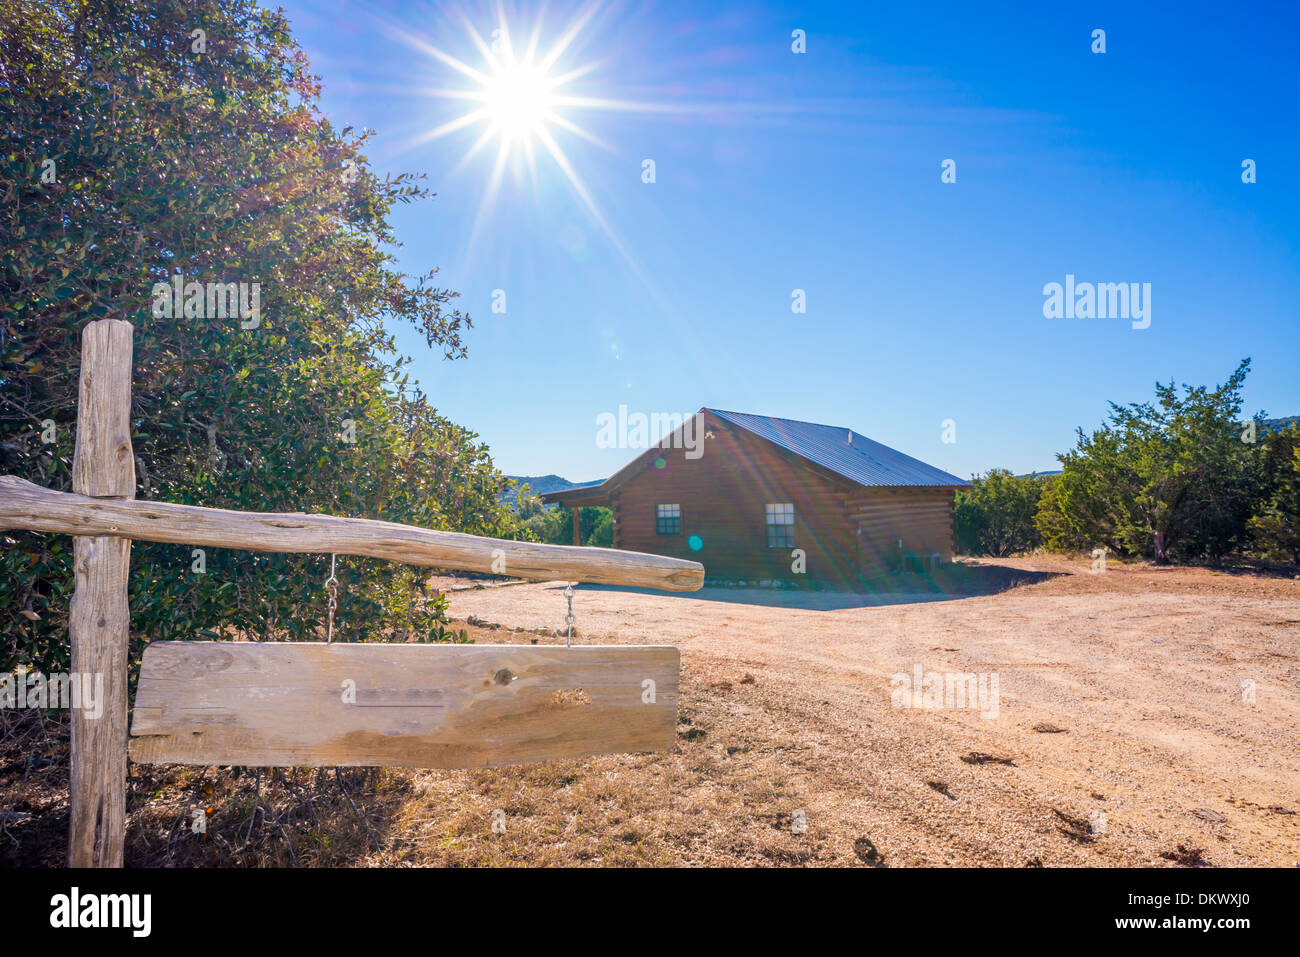 Canyon Breeze Cabin. Log home at remote location used as guest home. Sun with rays in the background, wooden name sign. Stock Photo